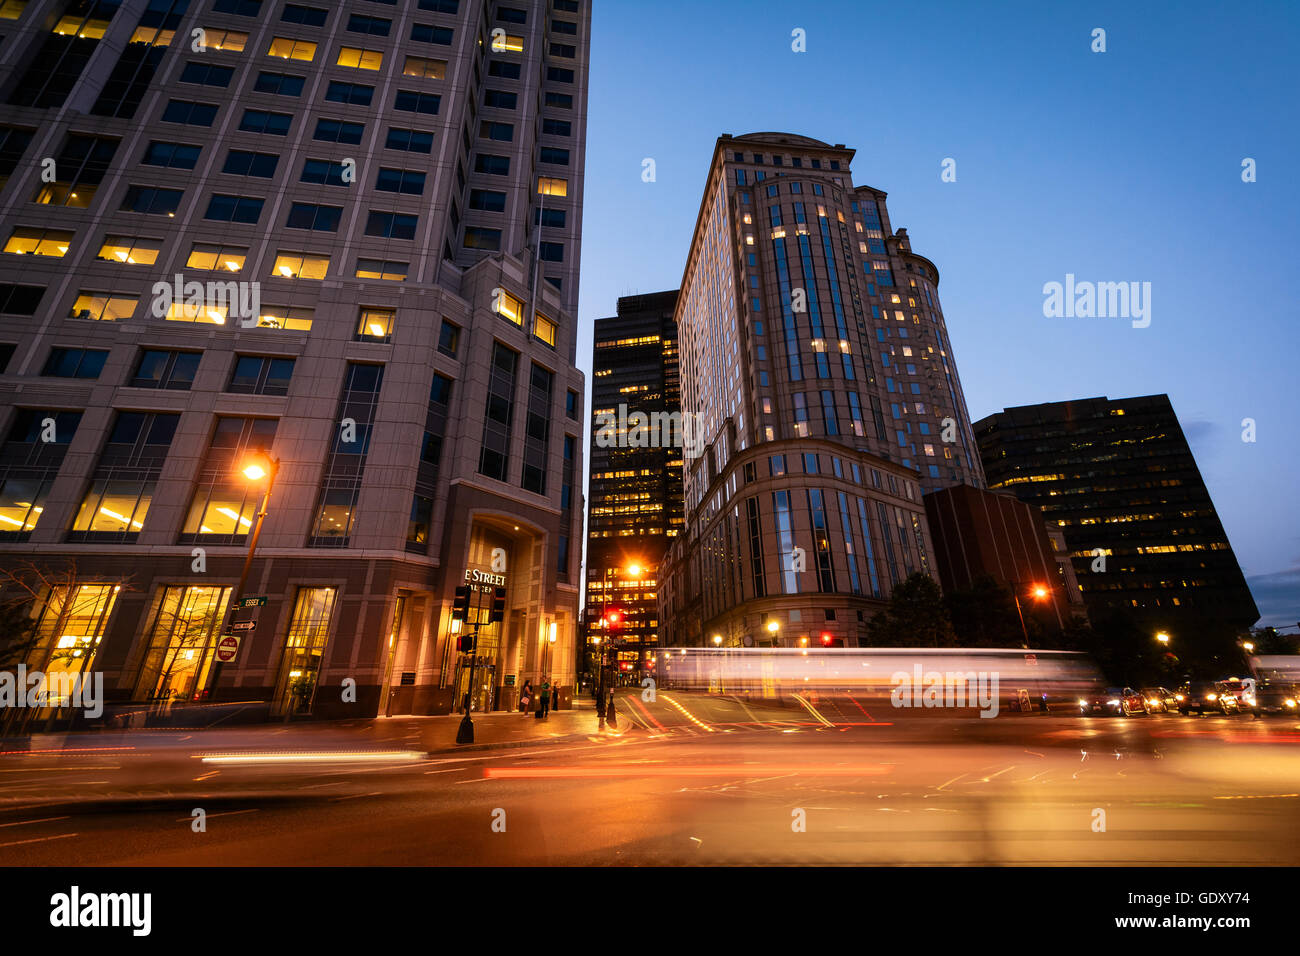 Long exposure of traffic and buildings in the Financial District at night, in Boston, Massachusetts. Stock Photo